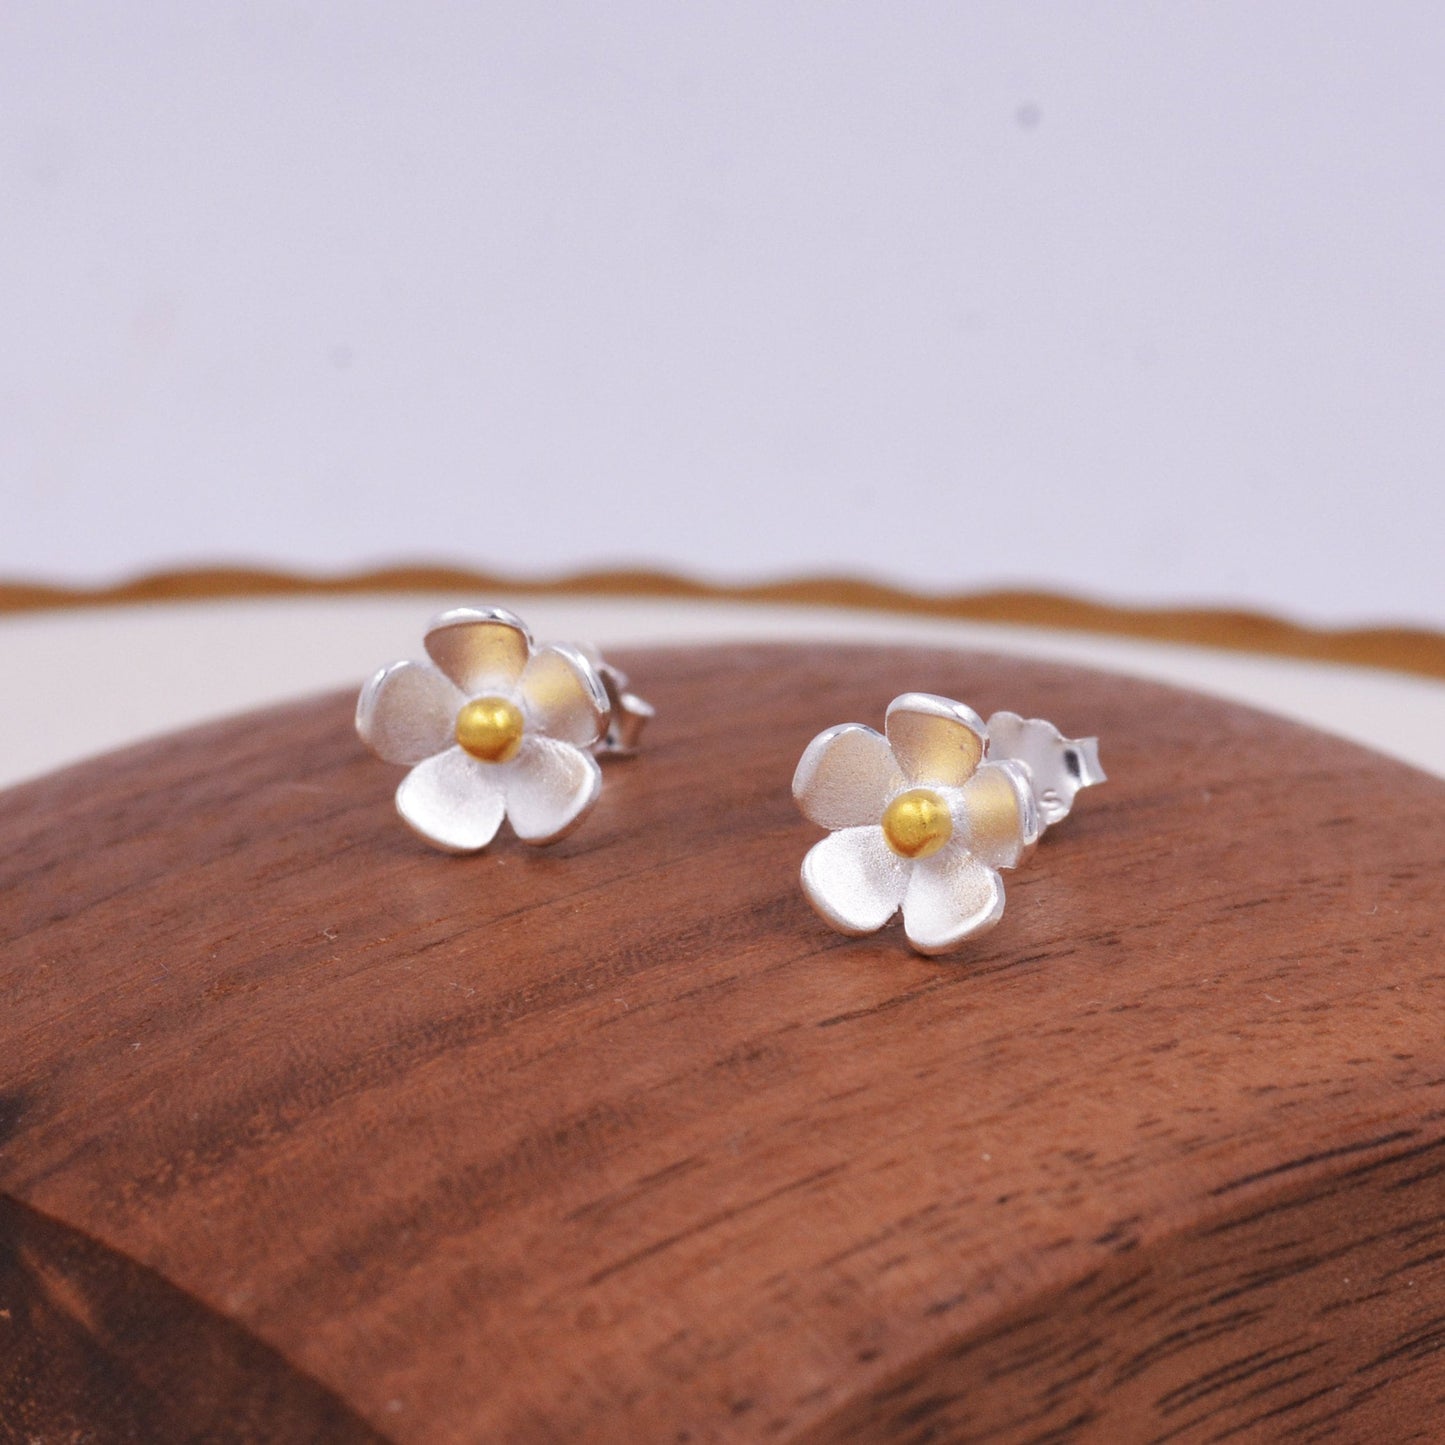 Sterling Silver Forget-me-not Flower Stud Earrings, Nature Inspired Blossom Earrings, Cute and Quirky